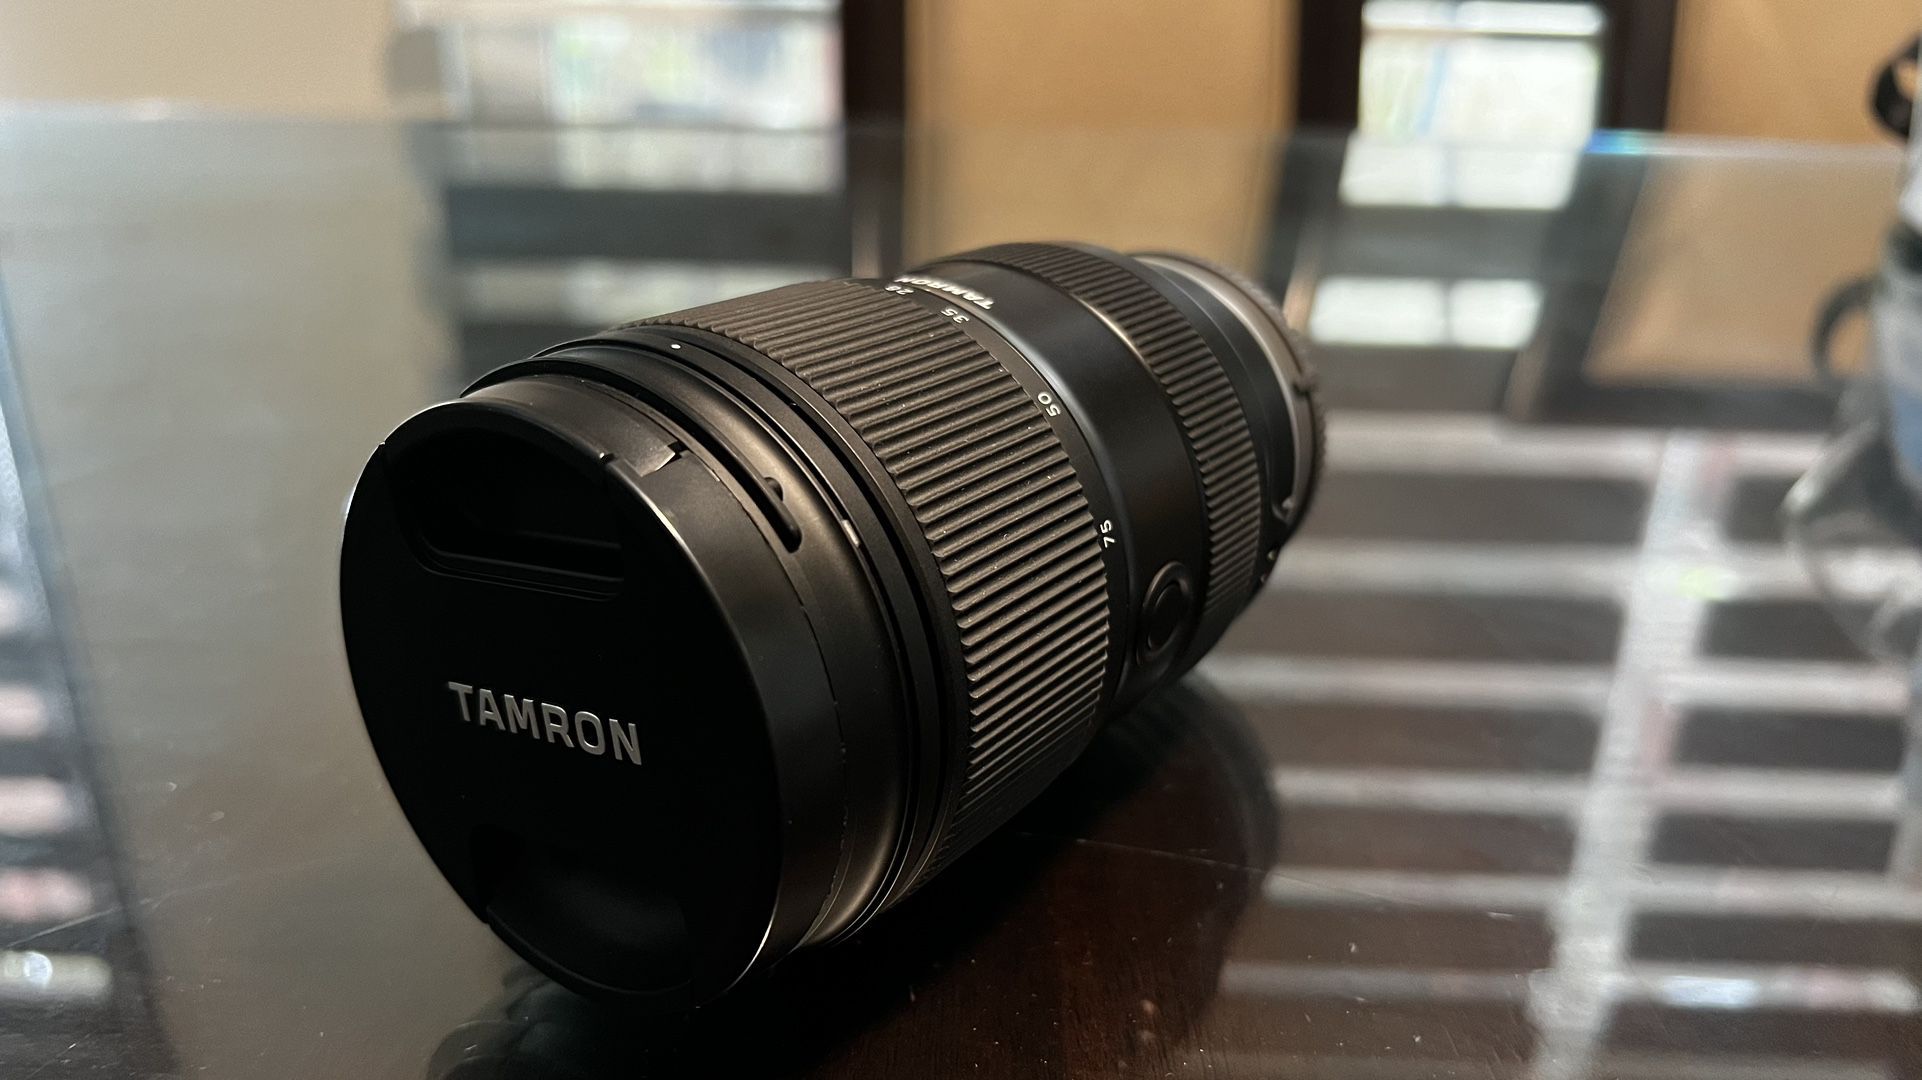 Tamron 28-75mm f/2.8 Zoom Lens for Sony E-Mount - Black, Used (A063 Di III VXD G2)